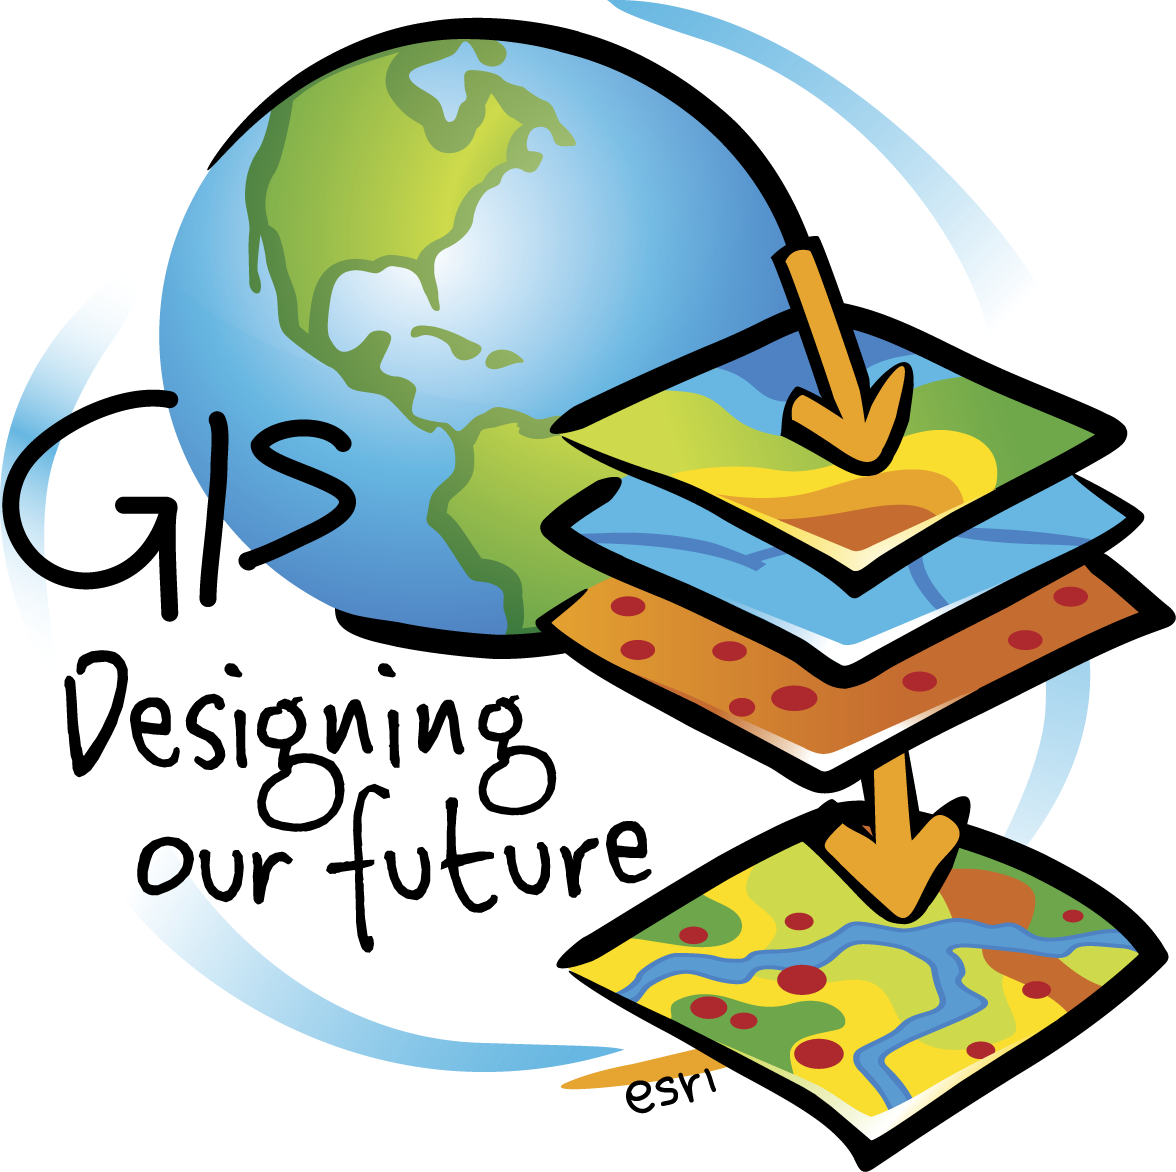 clipart world 5 theme geography